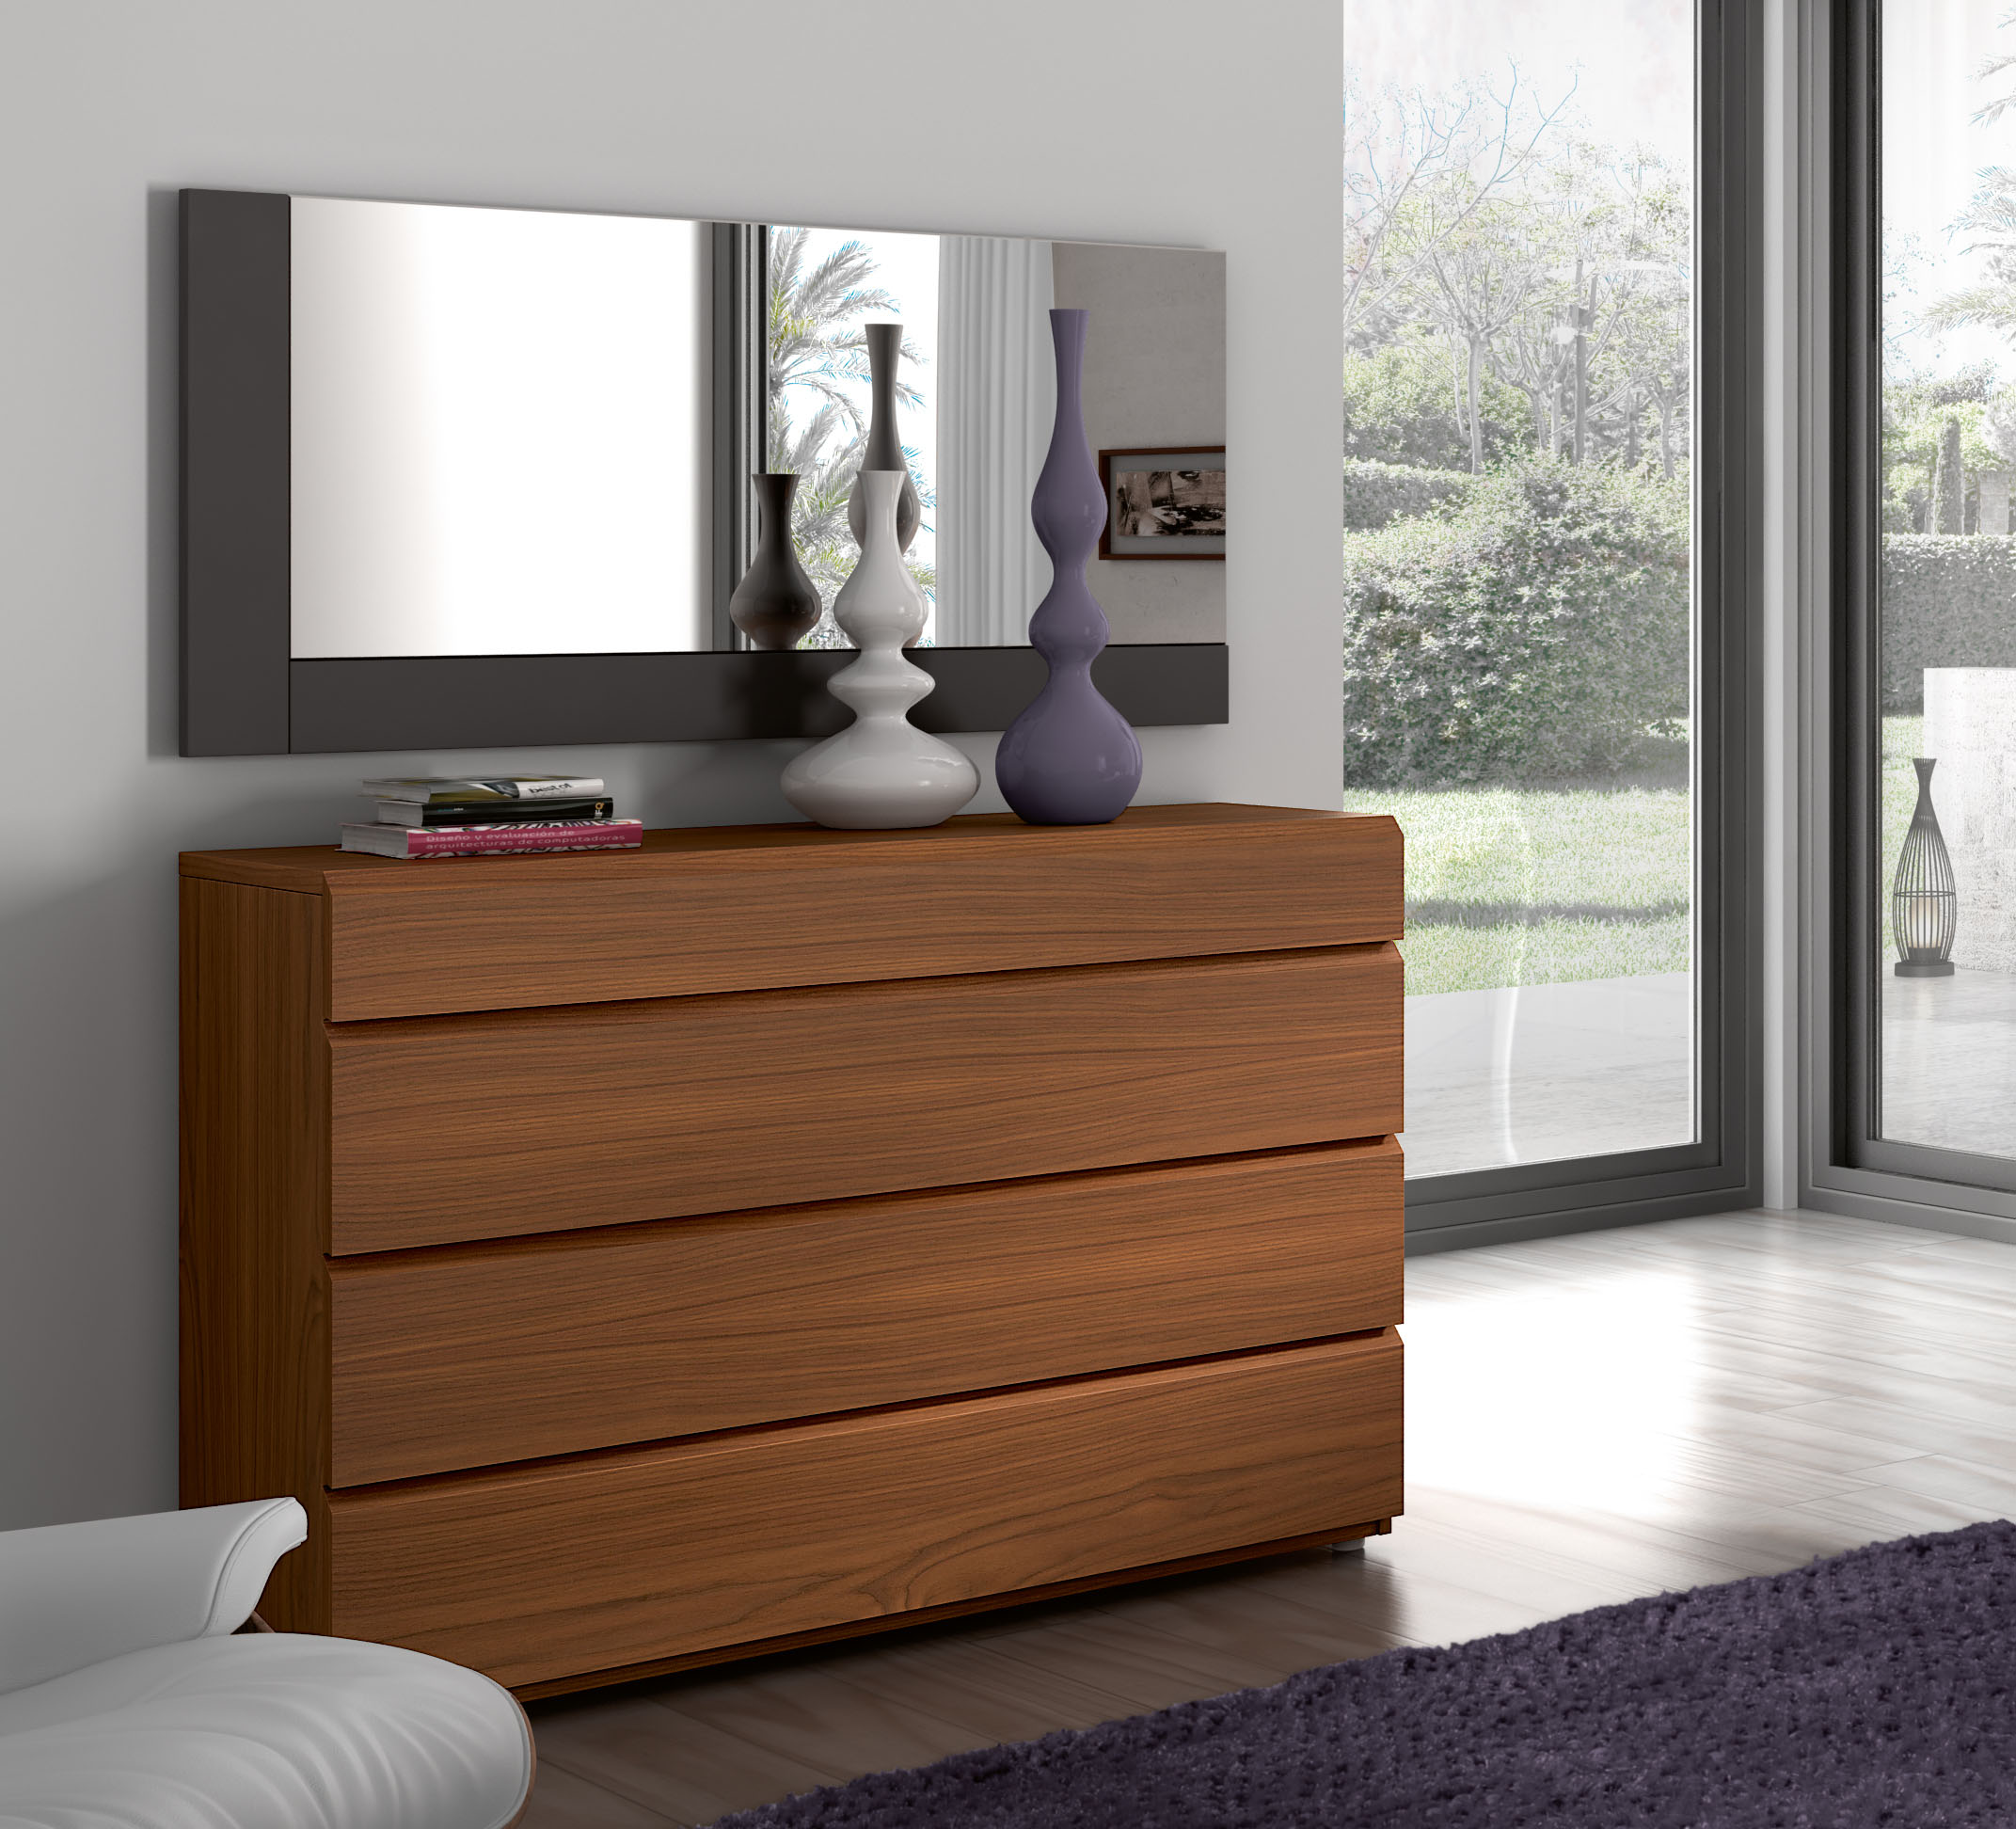 Made in Spain Wood Designer Bedroom Sets with Wide Headboard - Click Image to Close